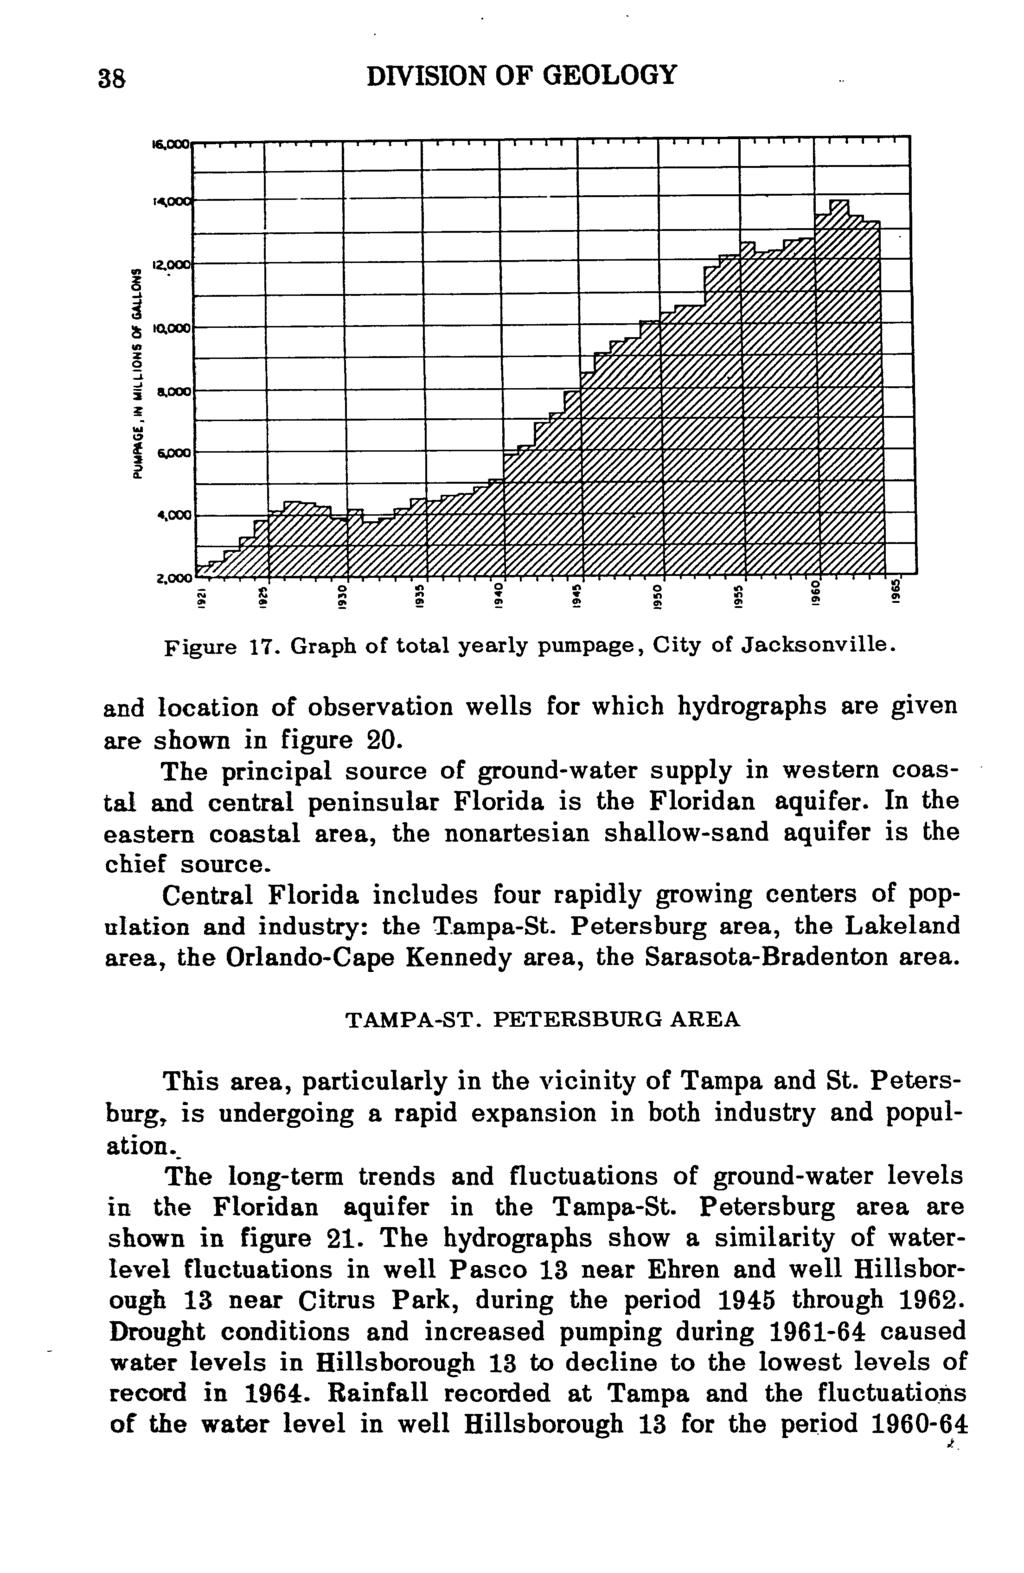 38 DIVISION OF GEOLOGY Figure 17. Graph of total yearly pumpage, City of Jacksonville. and location of observation wells for which hydrographs are given are shown in figure 20.